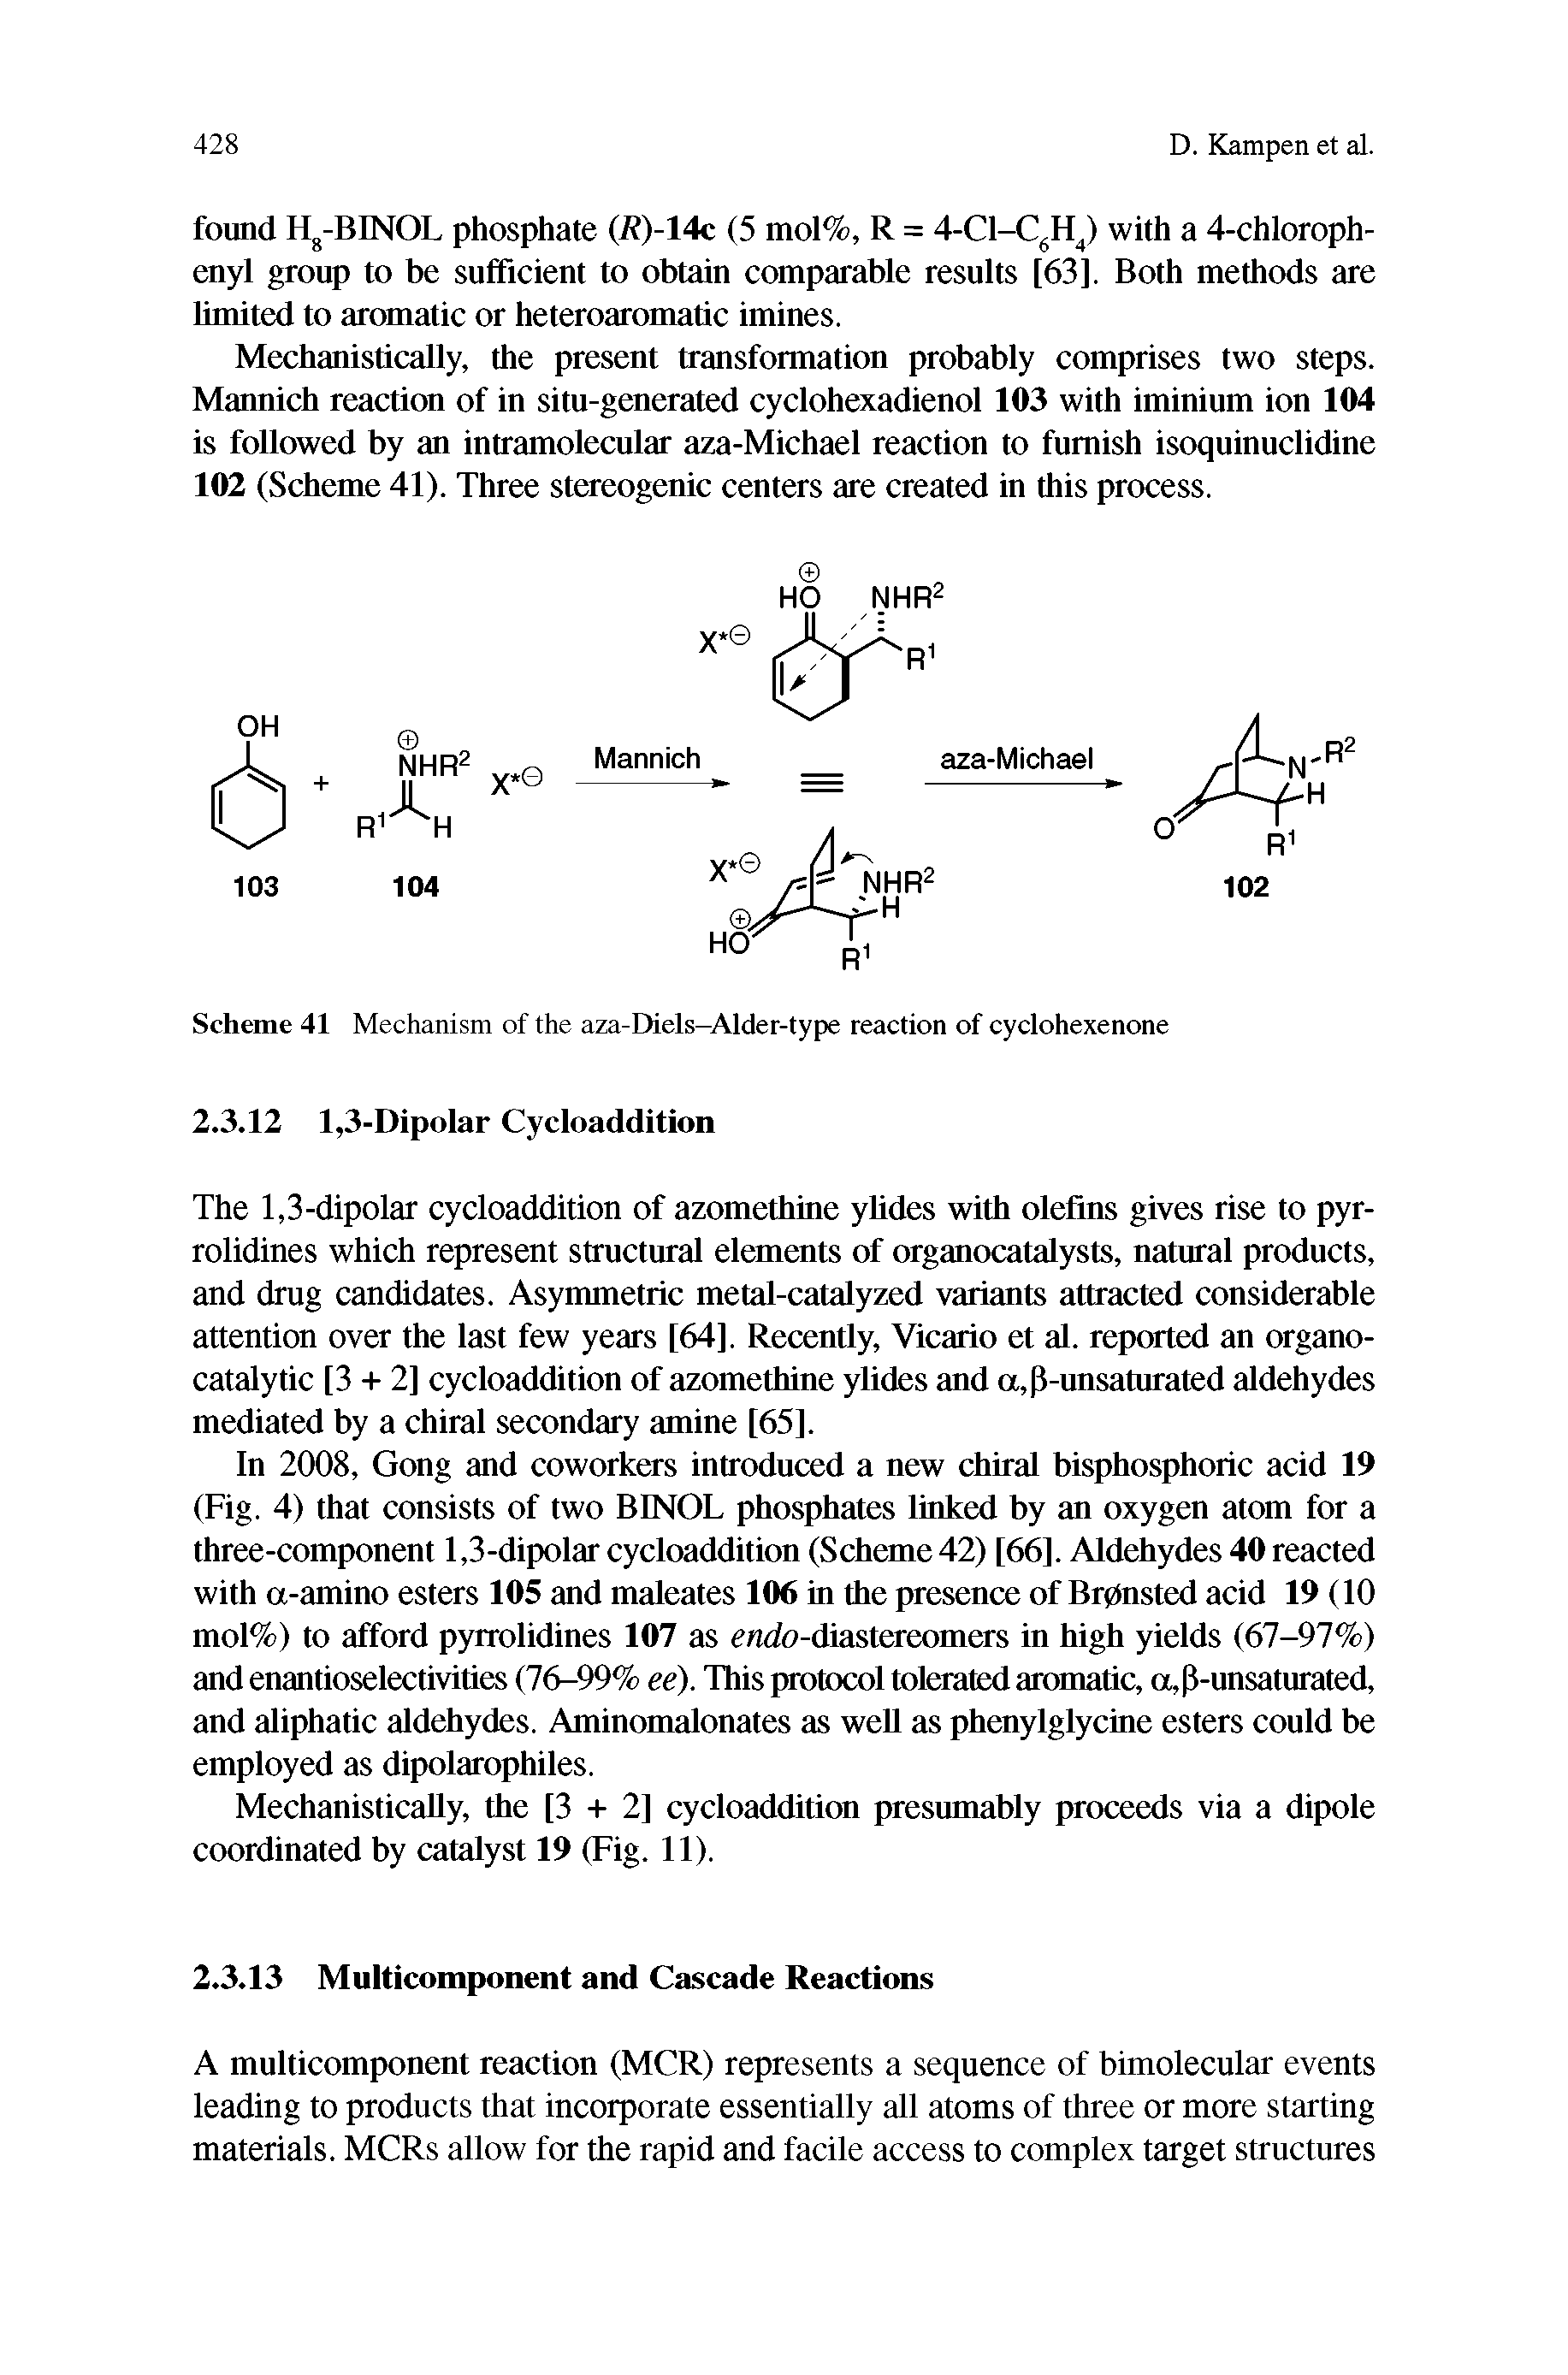 Scheme 41 Mechanism of the aza-Diels-Alder-type reaction of cyclohexenone 2.3.12 1,3-Dipolar Cycloaddition...